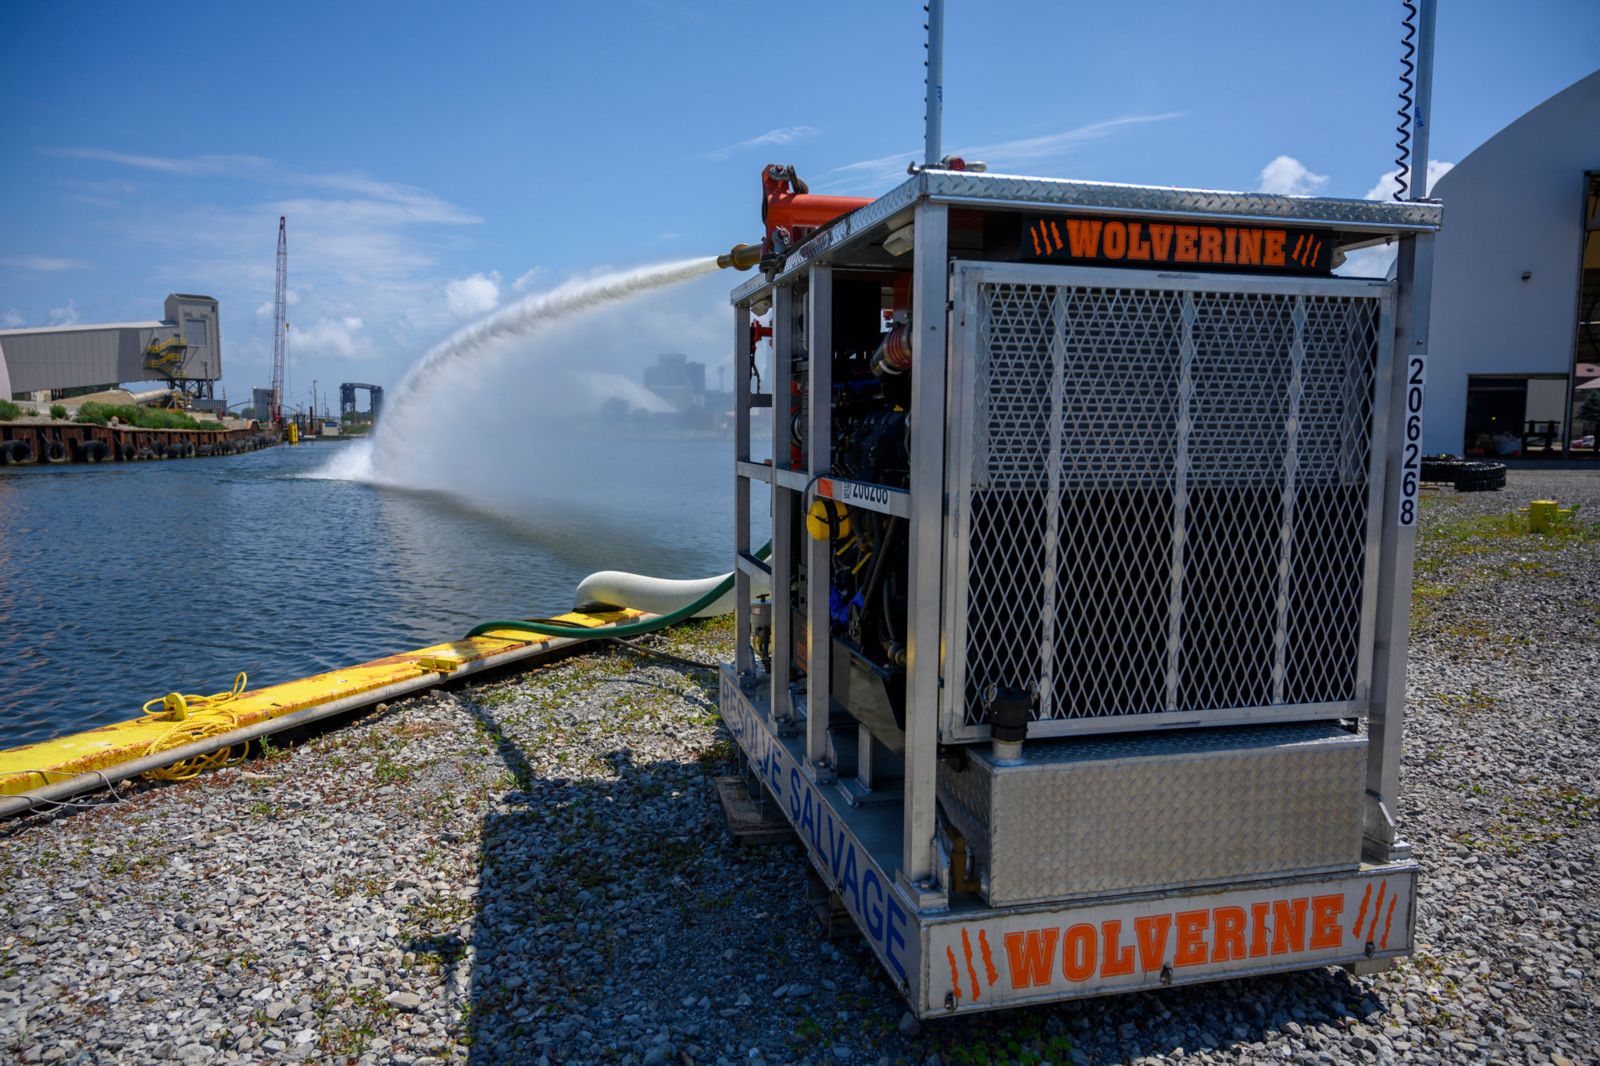 A high-pressure hose fires water from a metal container labeled Wolverine